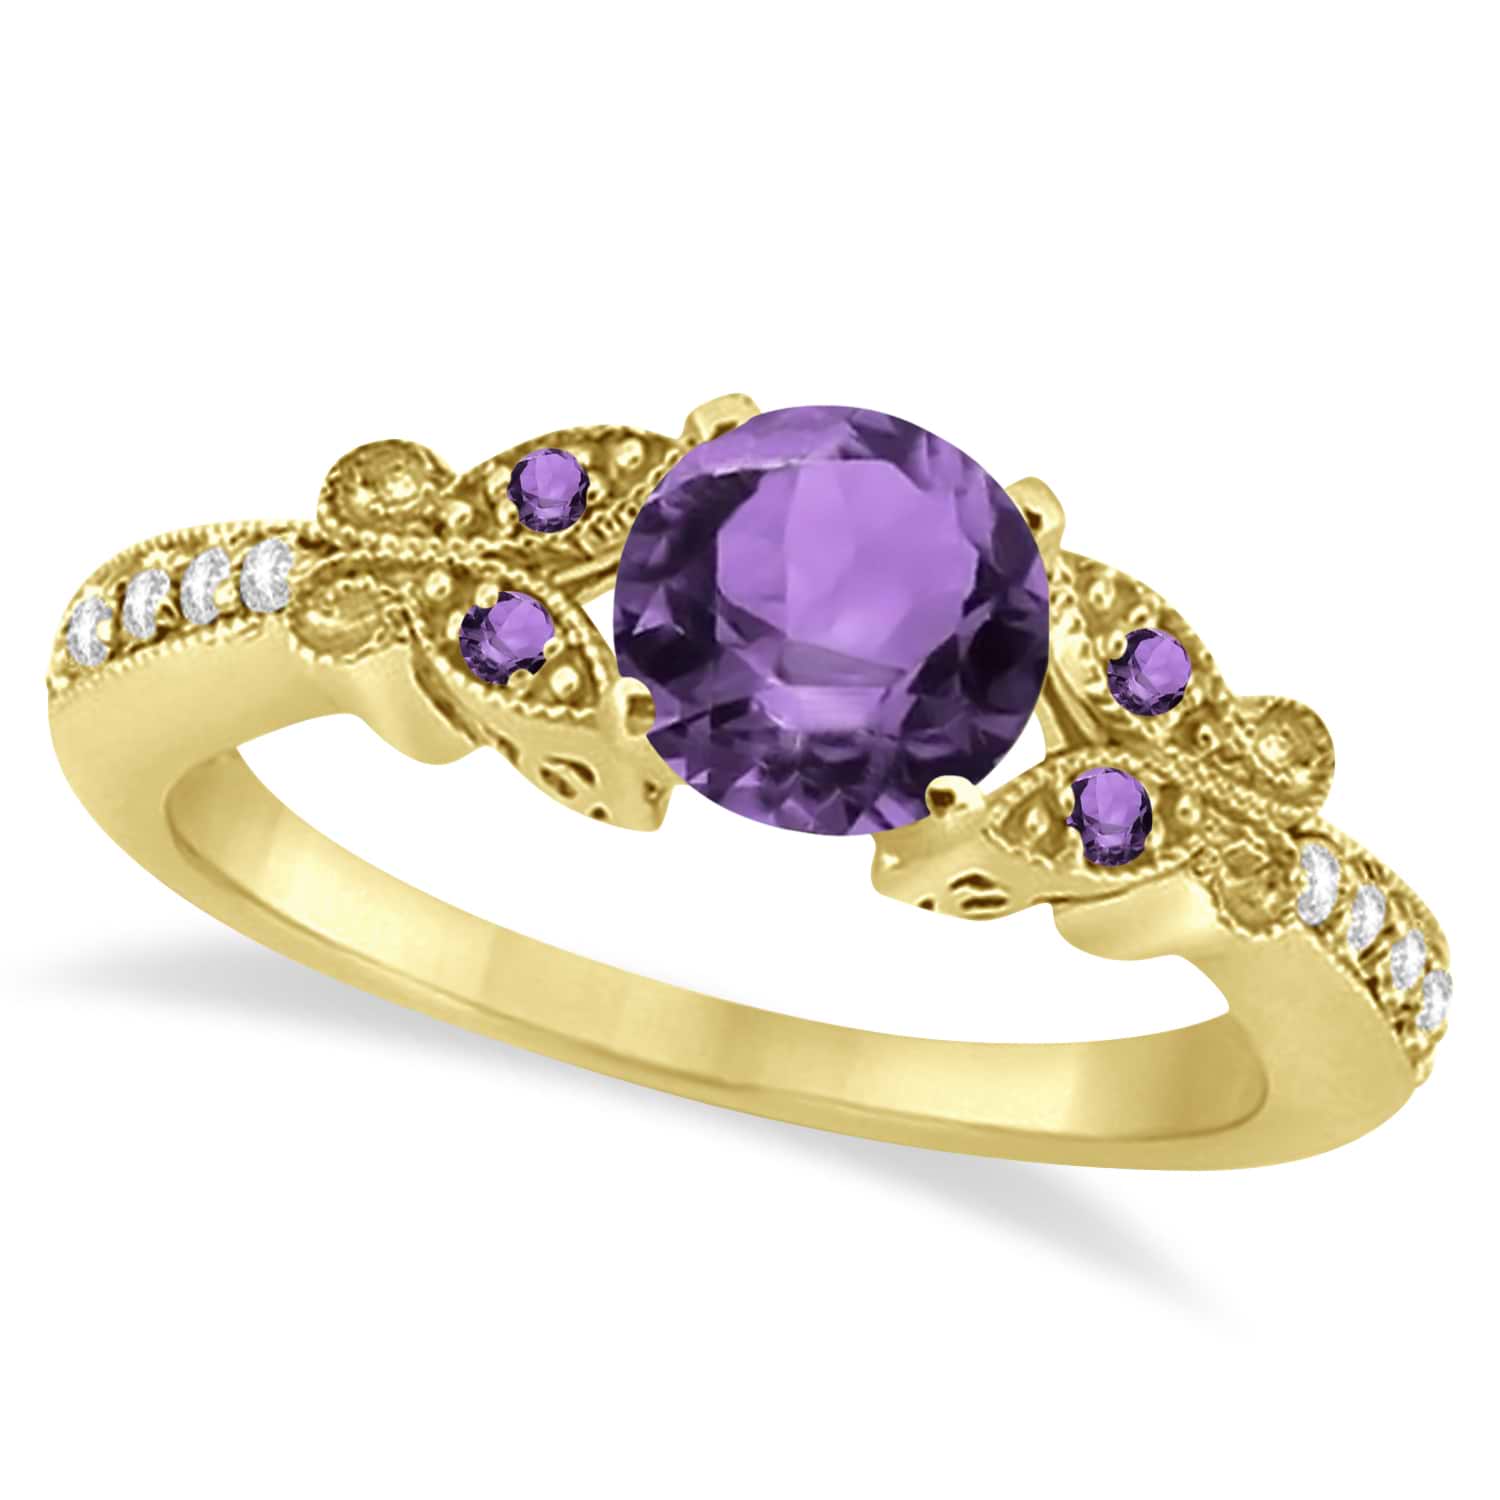 Butterfly Amethyst & Diamond Engagement Ring 14k Yellow Gold (1.53ct)